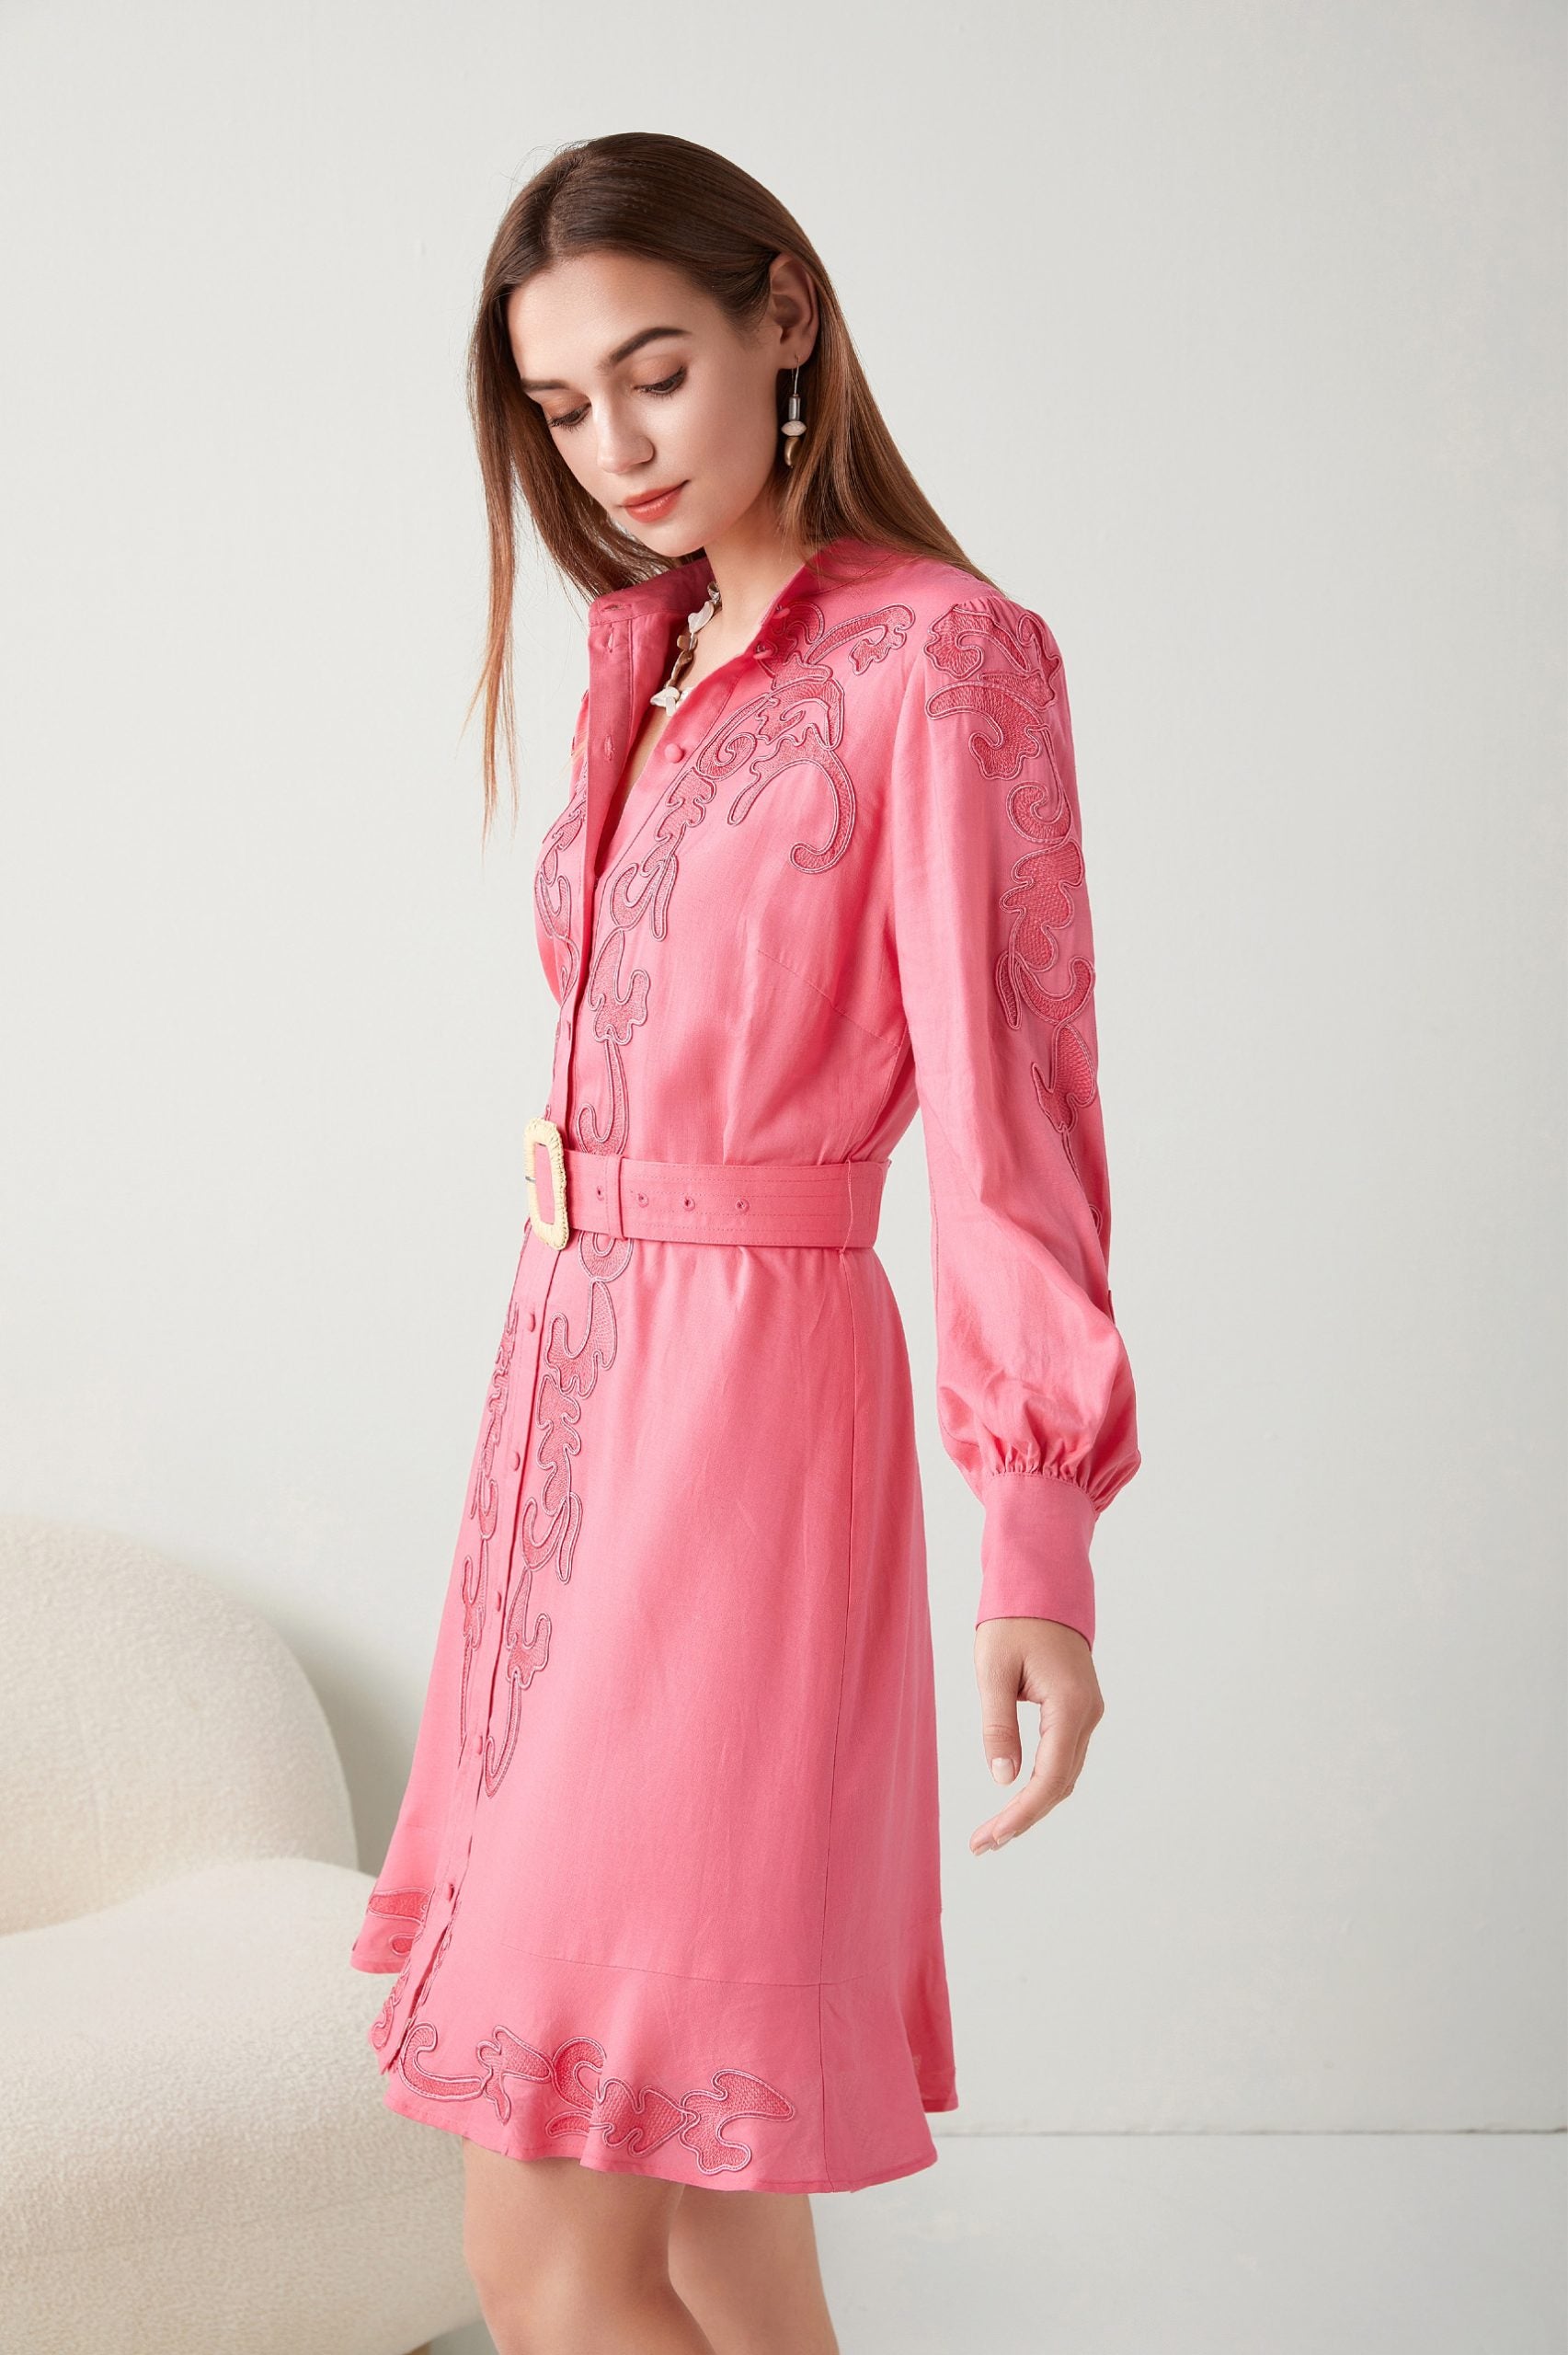 "Make a statement in pink! Our floral-embroidered dress is the epitome of chic sophistication. Discover your new favorite."